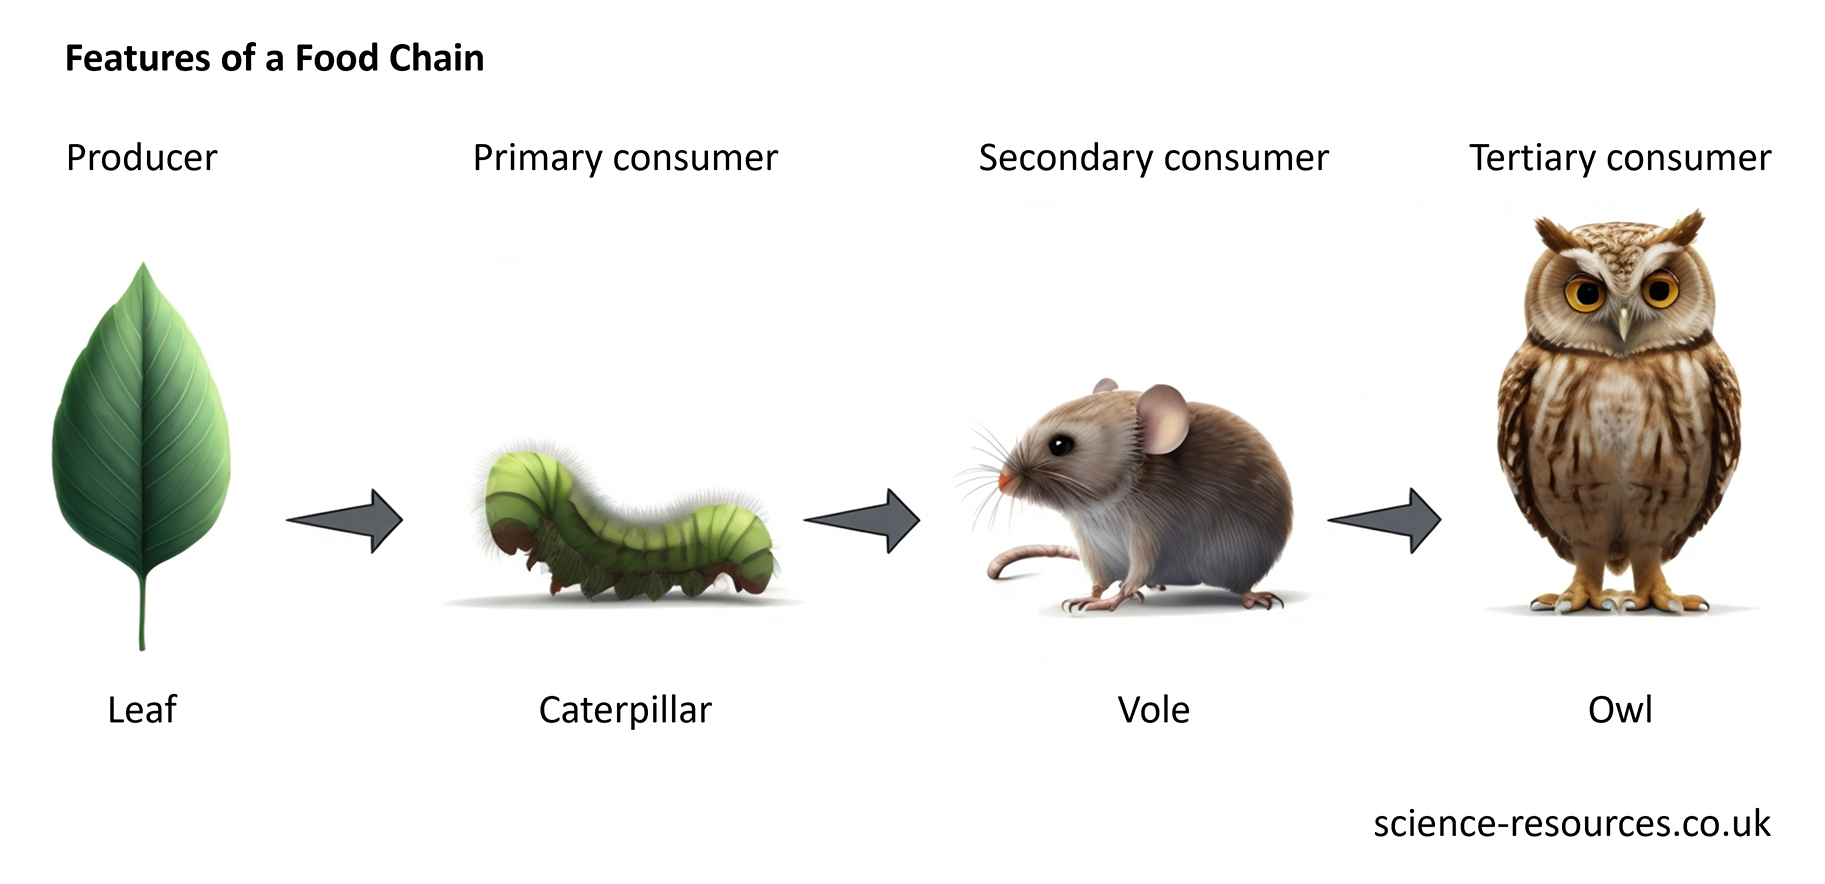 This image is a diagram of a food chain, showing how energy and matter flow from plants to animals. It has four levels: producer, primary consumer, secondary consumer, and tertiary consumer. The producer is a leaf, the primary consumer is a caterpillar, the secondary consumer is a vole, and the tertiary consumer is an owl. 